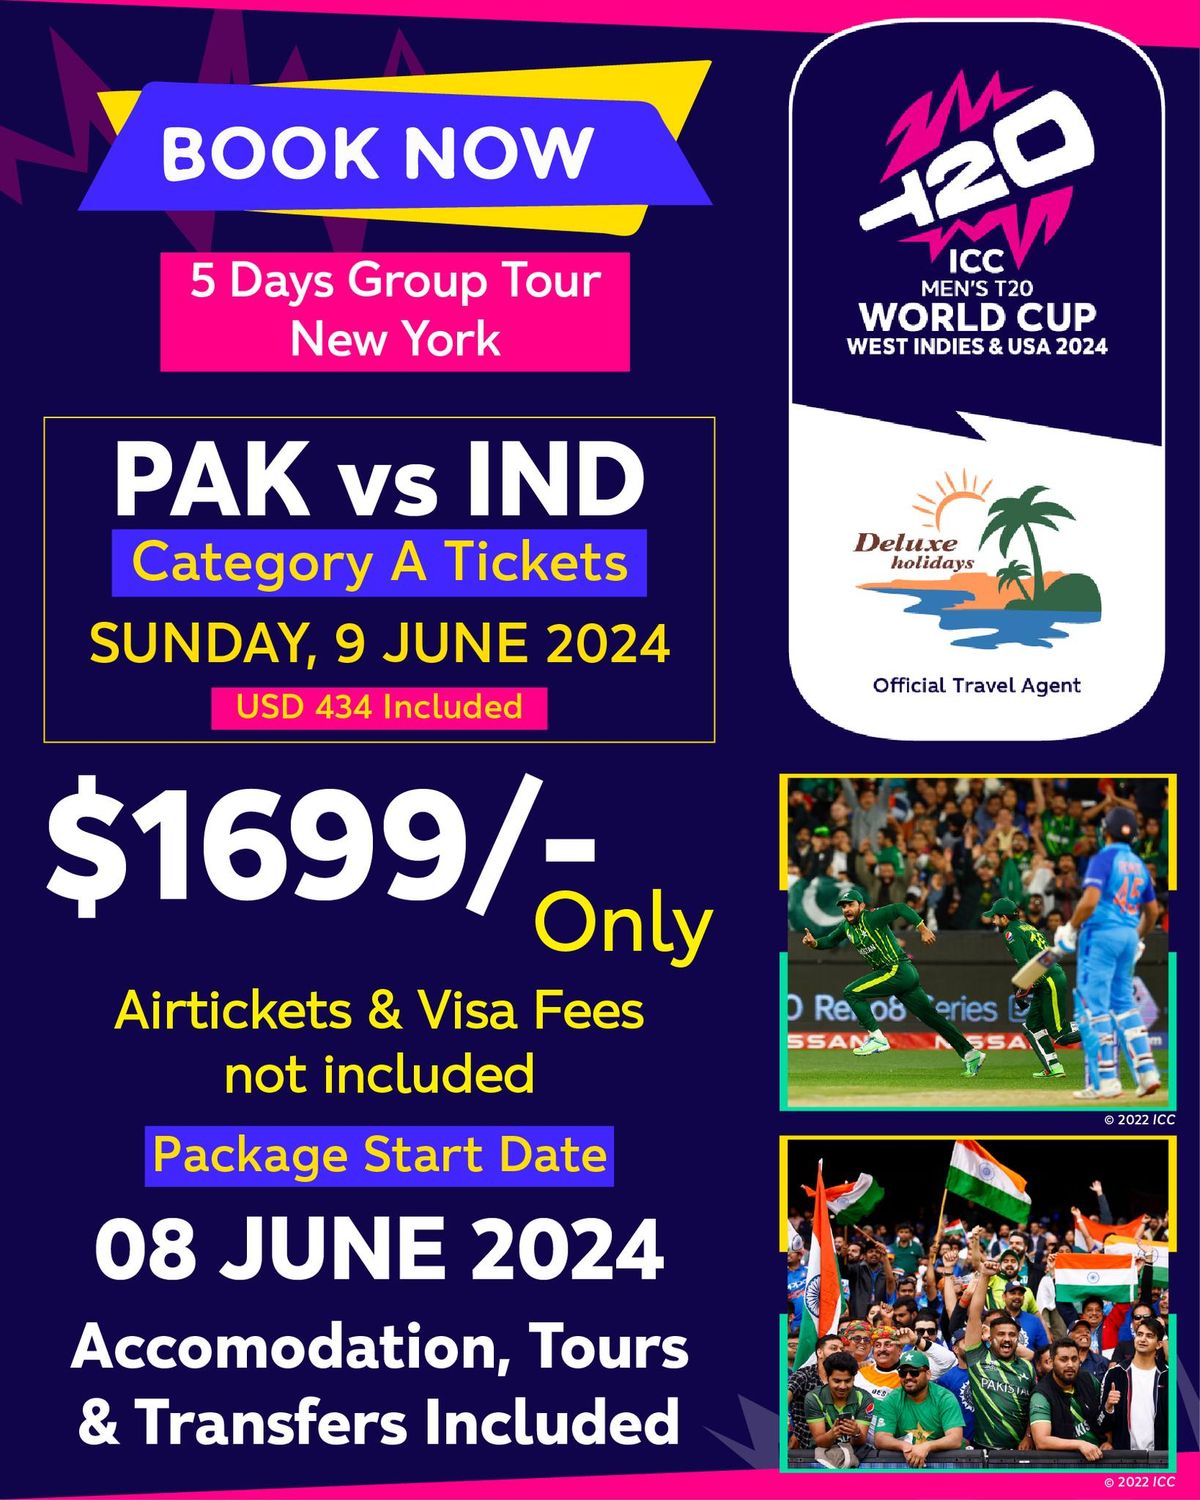 USA T20 WORLD CUP 5 DAYS GROUP TOUR! Ž  PAKISTAN VS INDIA EXPERIENCE IN NEW YORK, USA! µ°®³